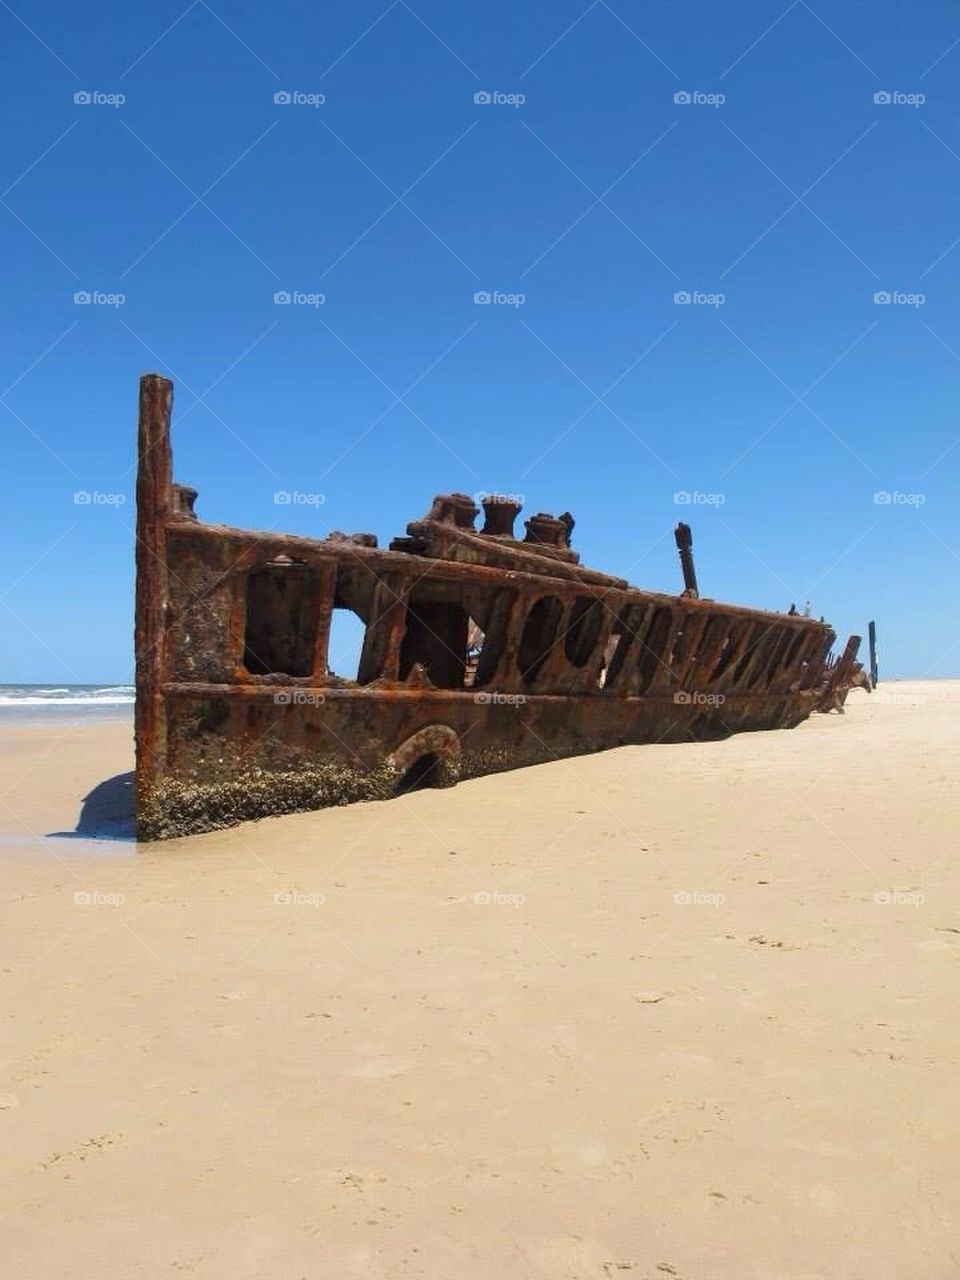 In 1935 the SS Maheno broke it's tow lines and washed ashore at Fraser